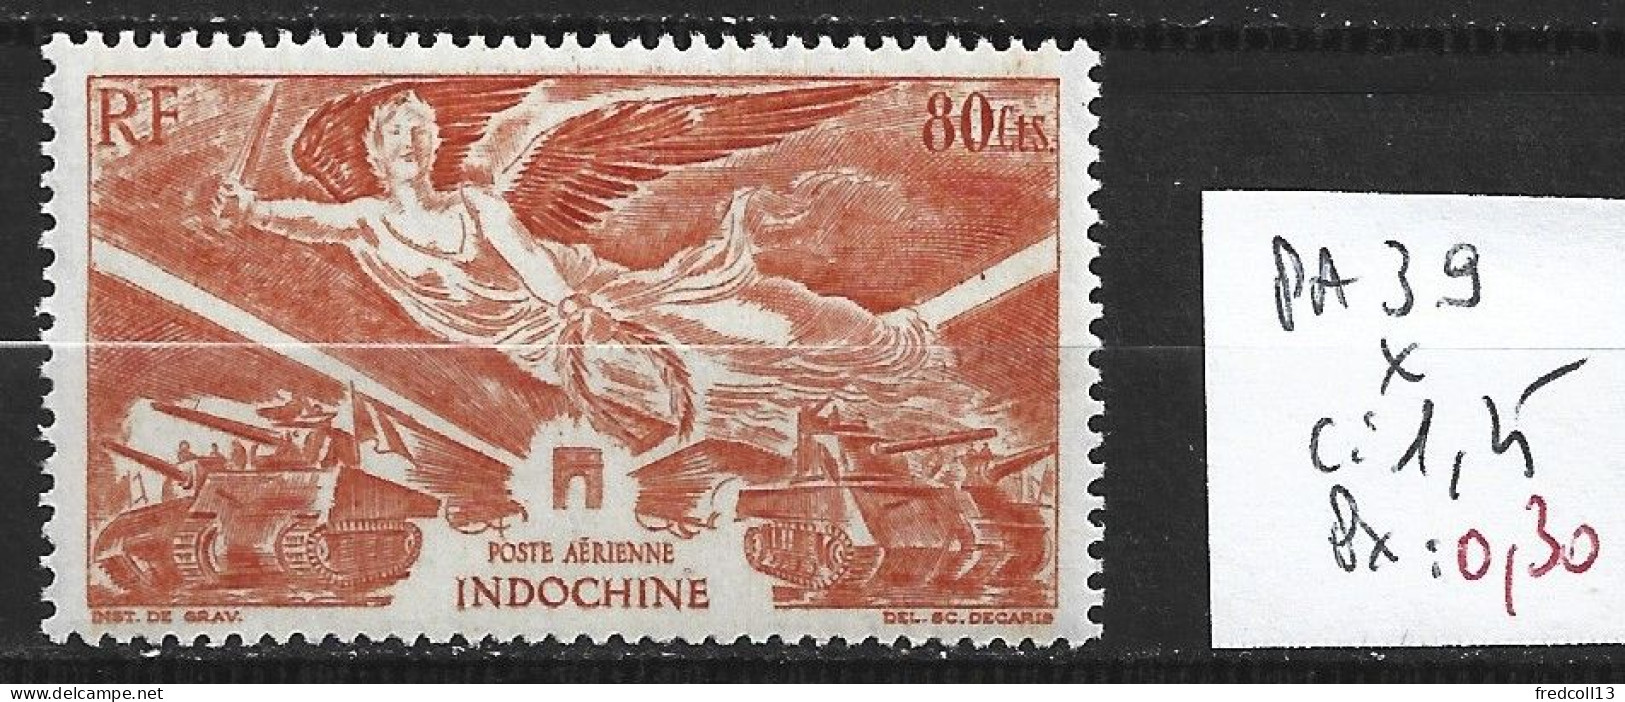 INDOCHINE PA 39 * Côte 1.25 € - Airmail